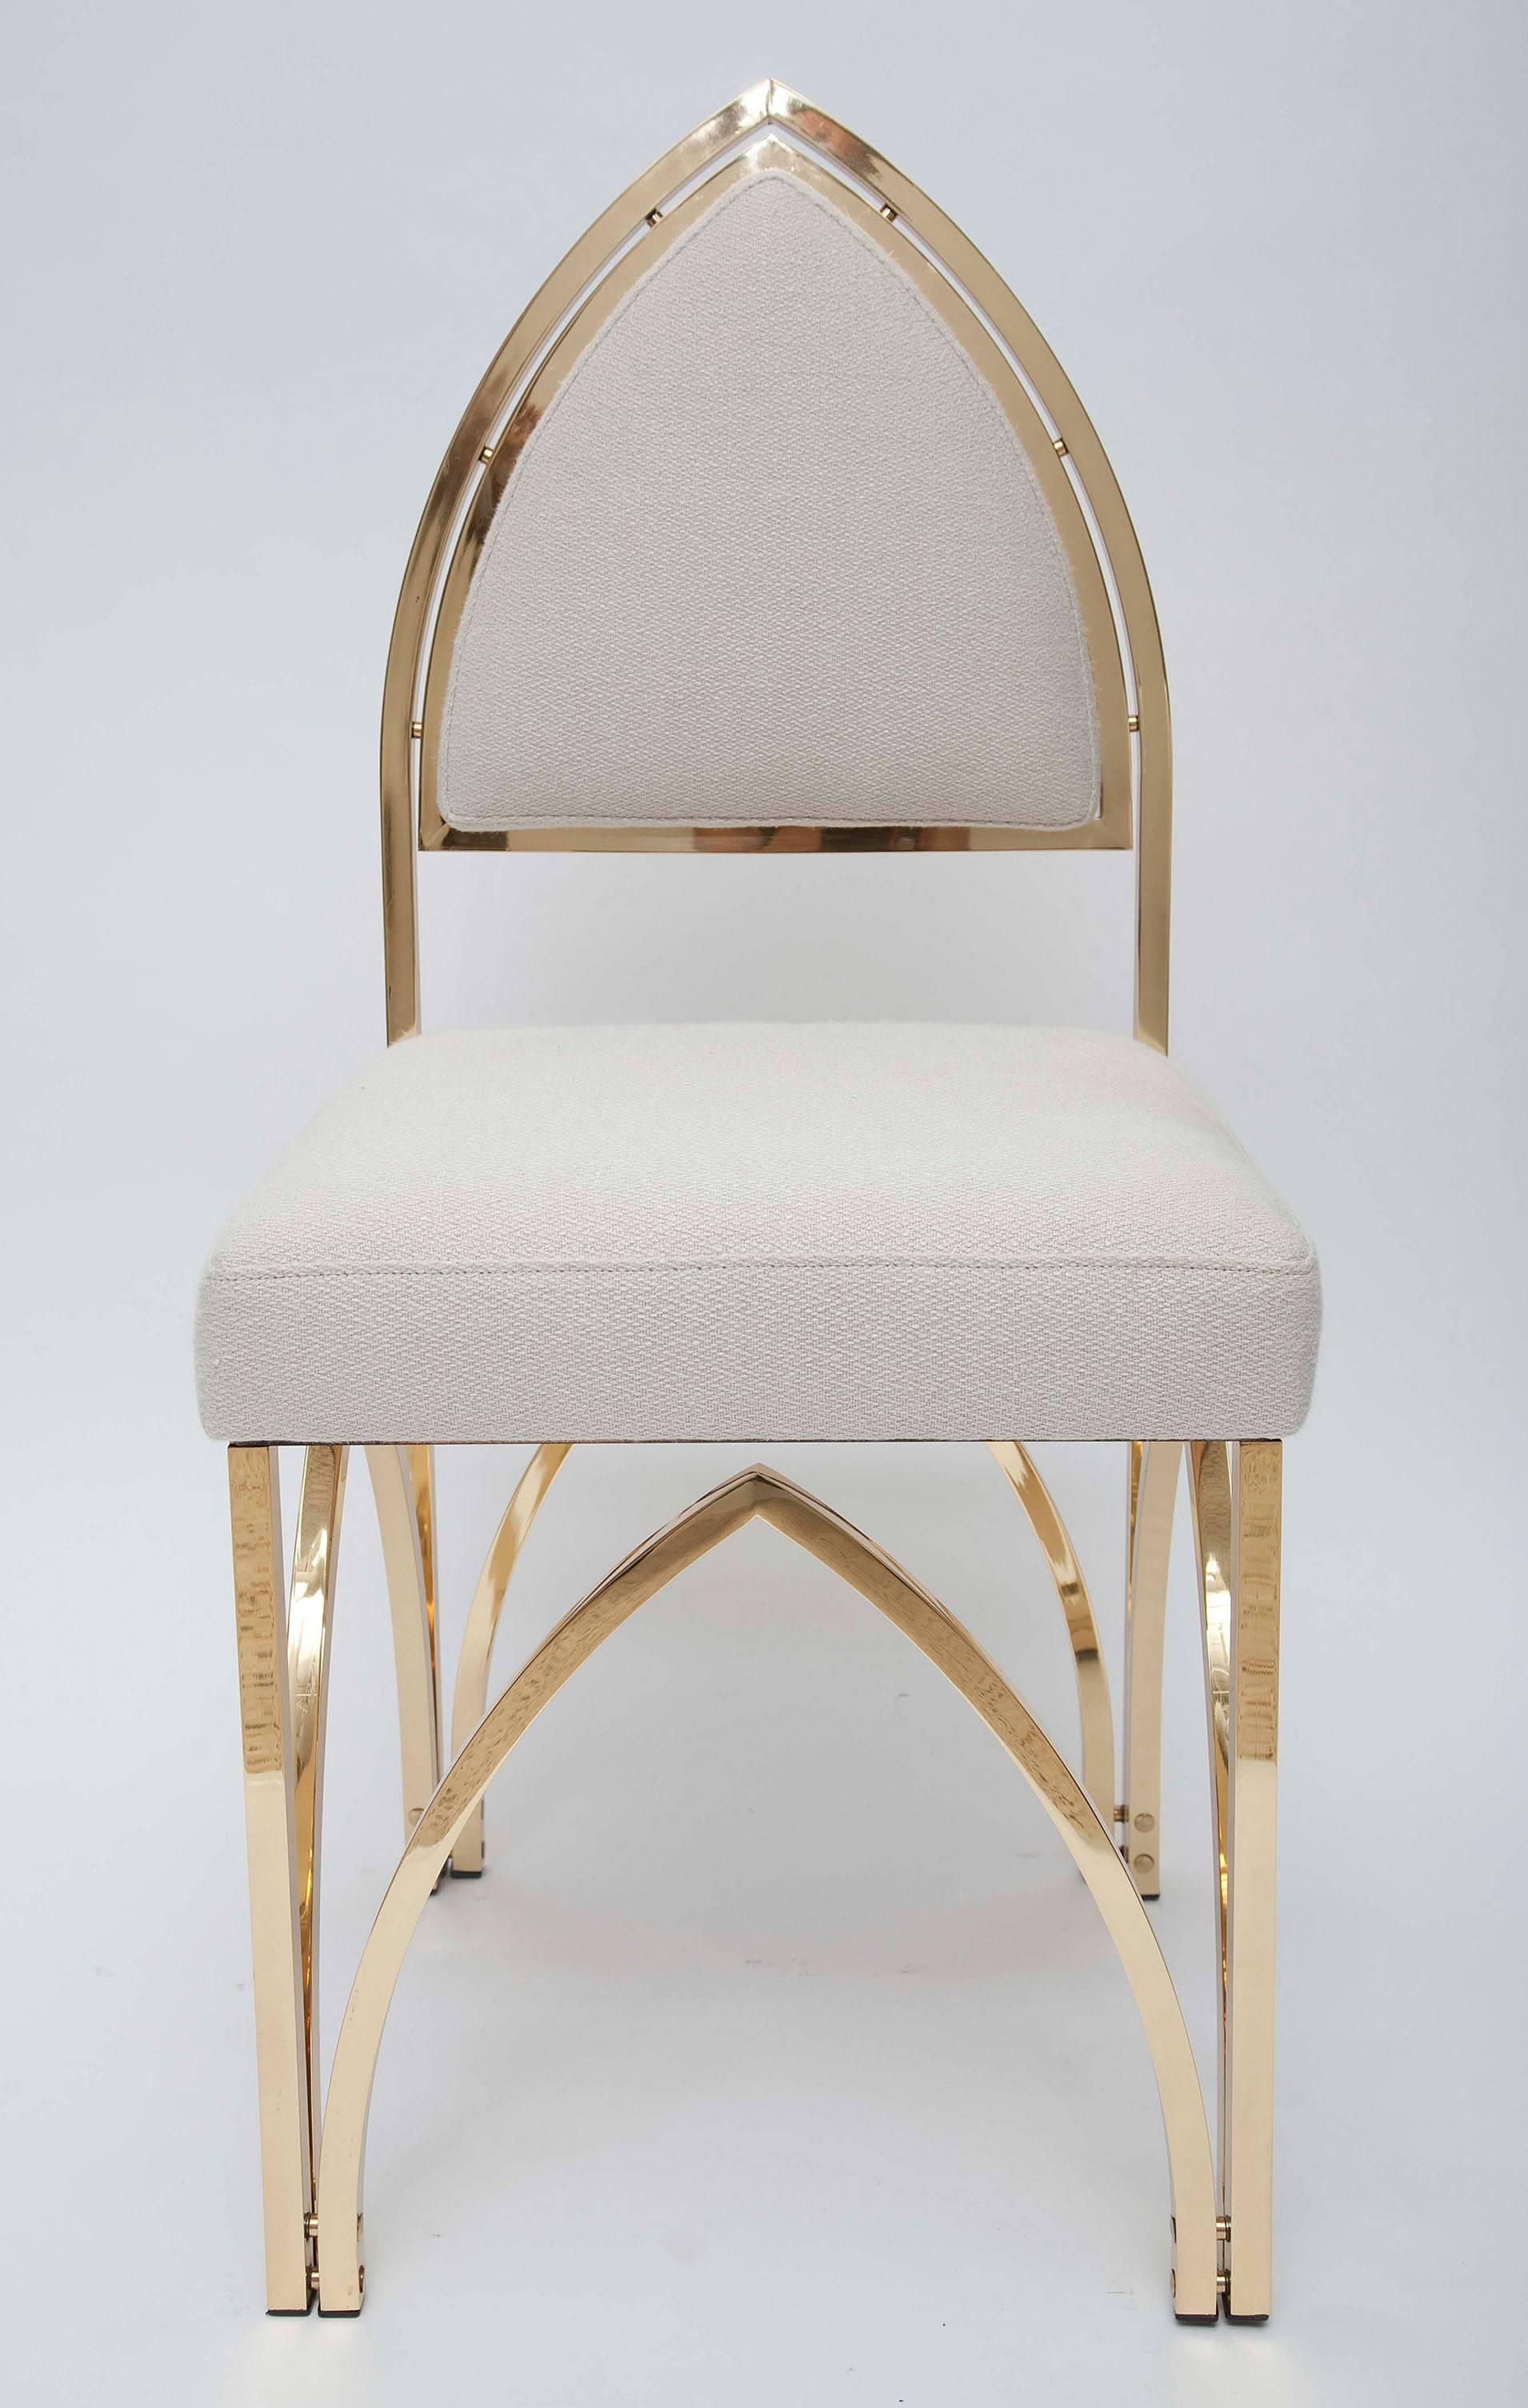 Architectural, romantic, charming - all words that describe these Gothic-inspired solid brass chairs, made in Italy, circa 1970. Professionally polished and upholstered in thick, Belgian linen. (Swatches available on request.)